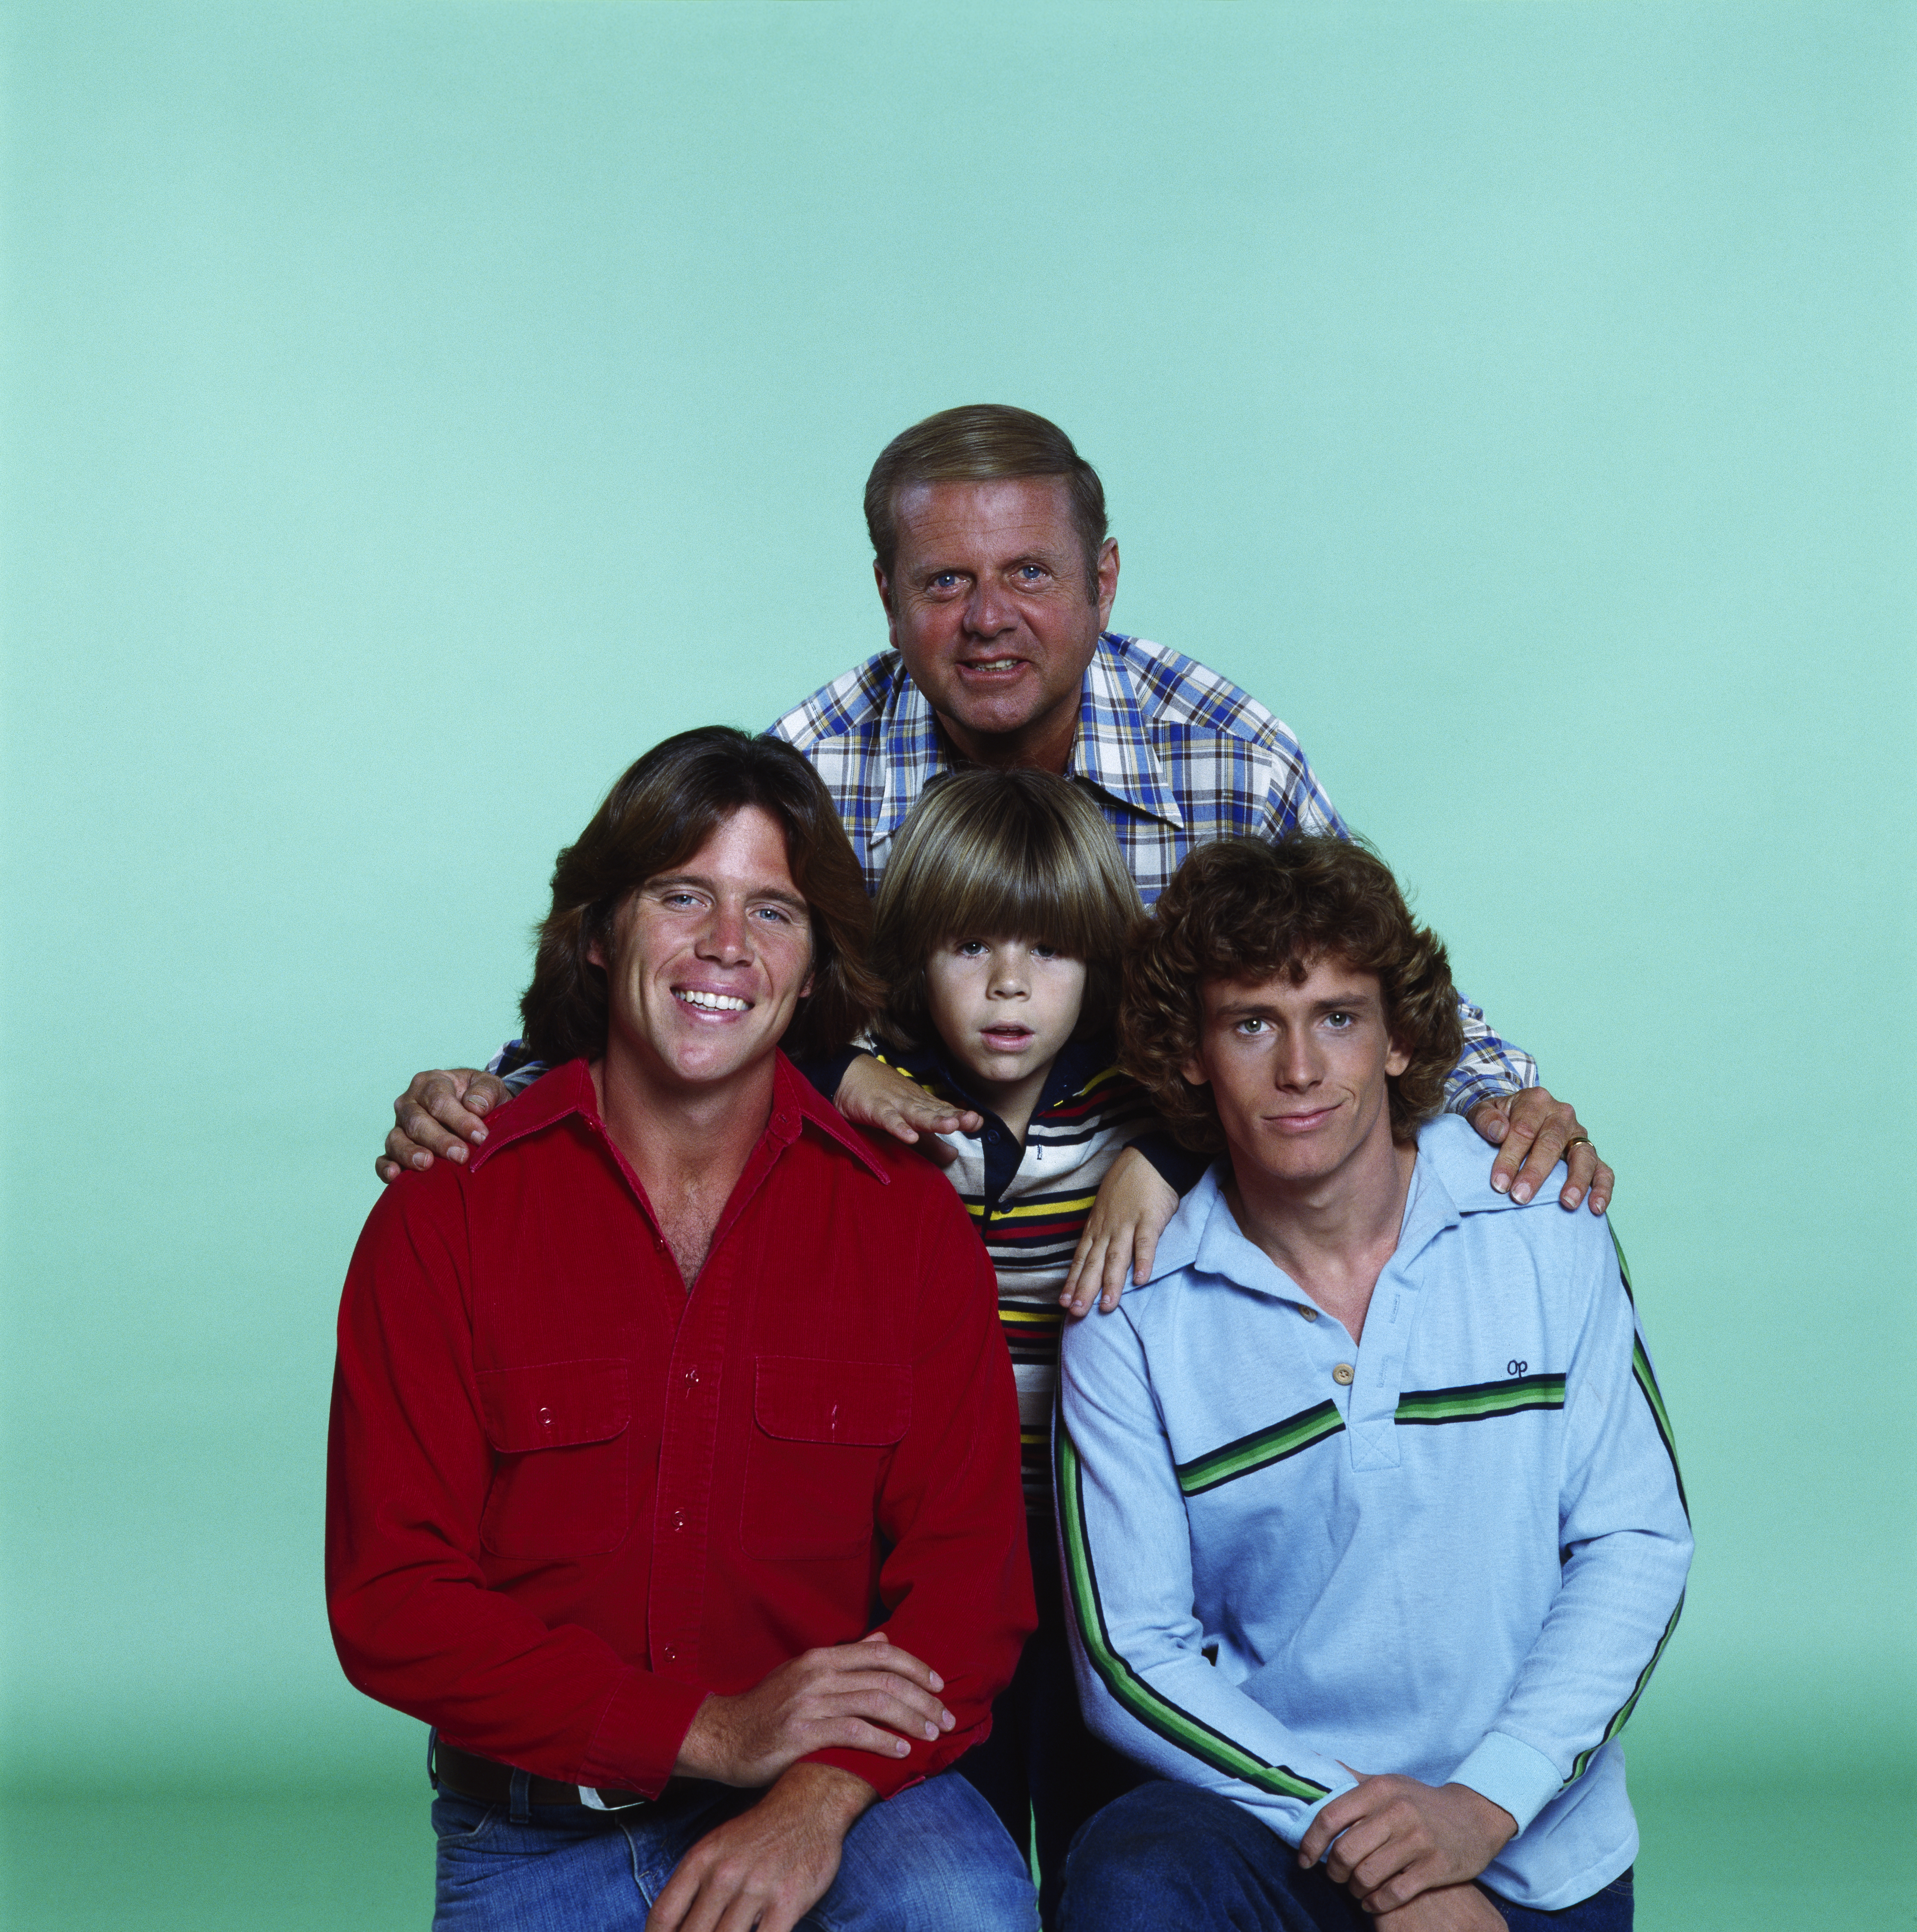 (Top) Dick Van Patten ( L-R) Grant Goodeve, Adam Rich and Willie Aames pictured on August 1, 1977 | Source: Getty Images